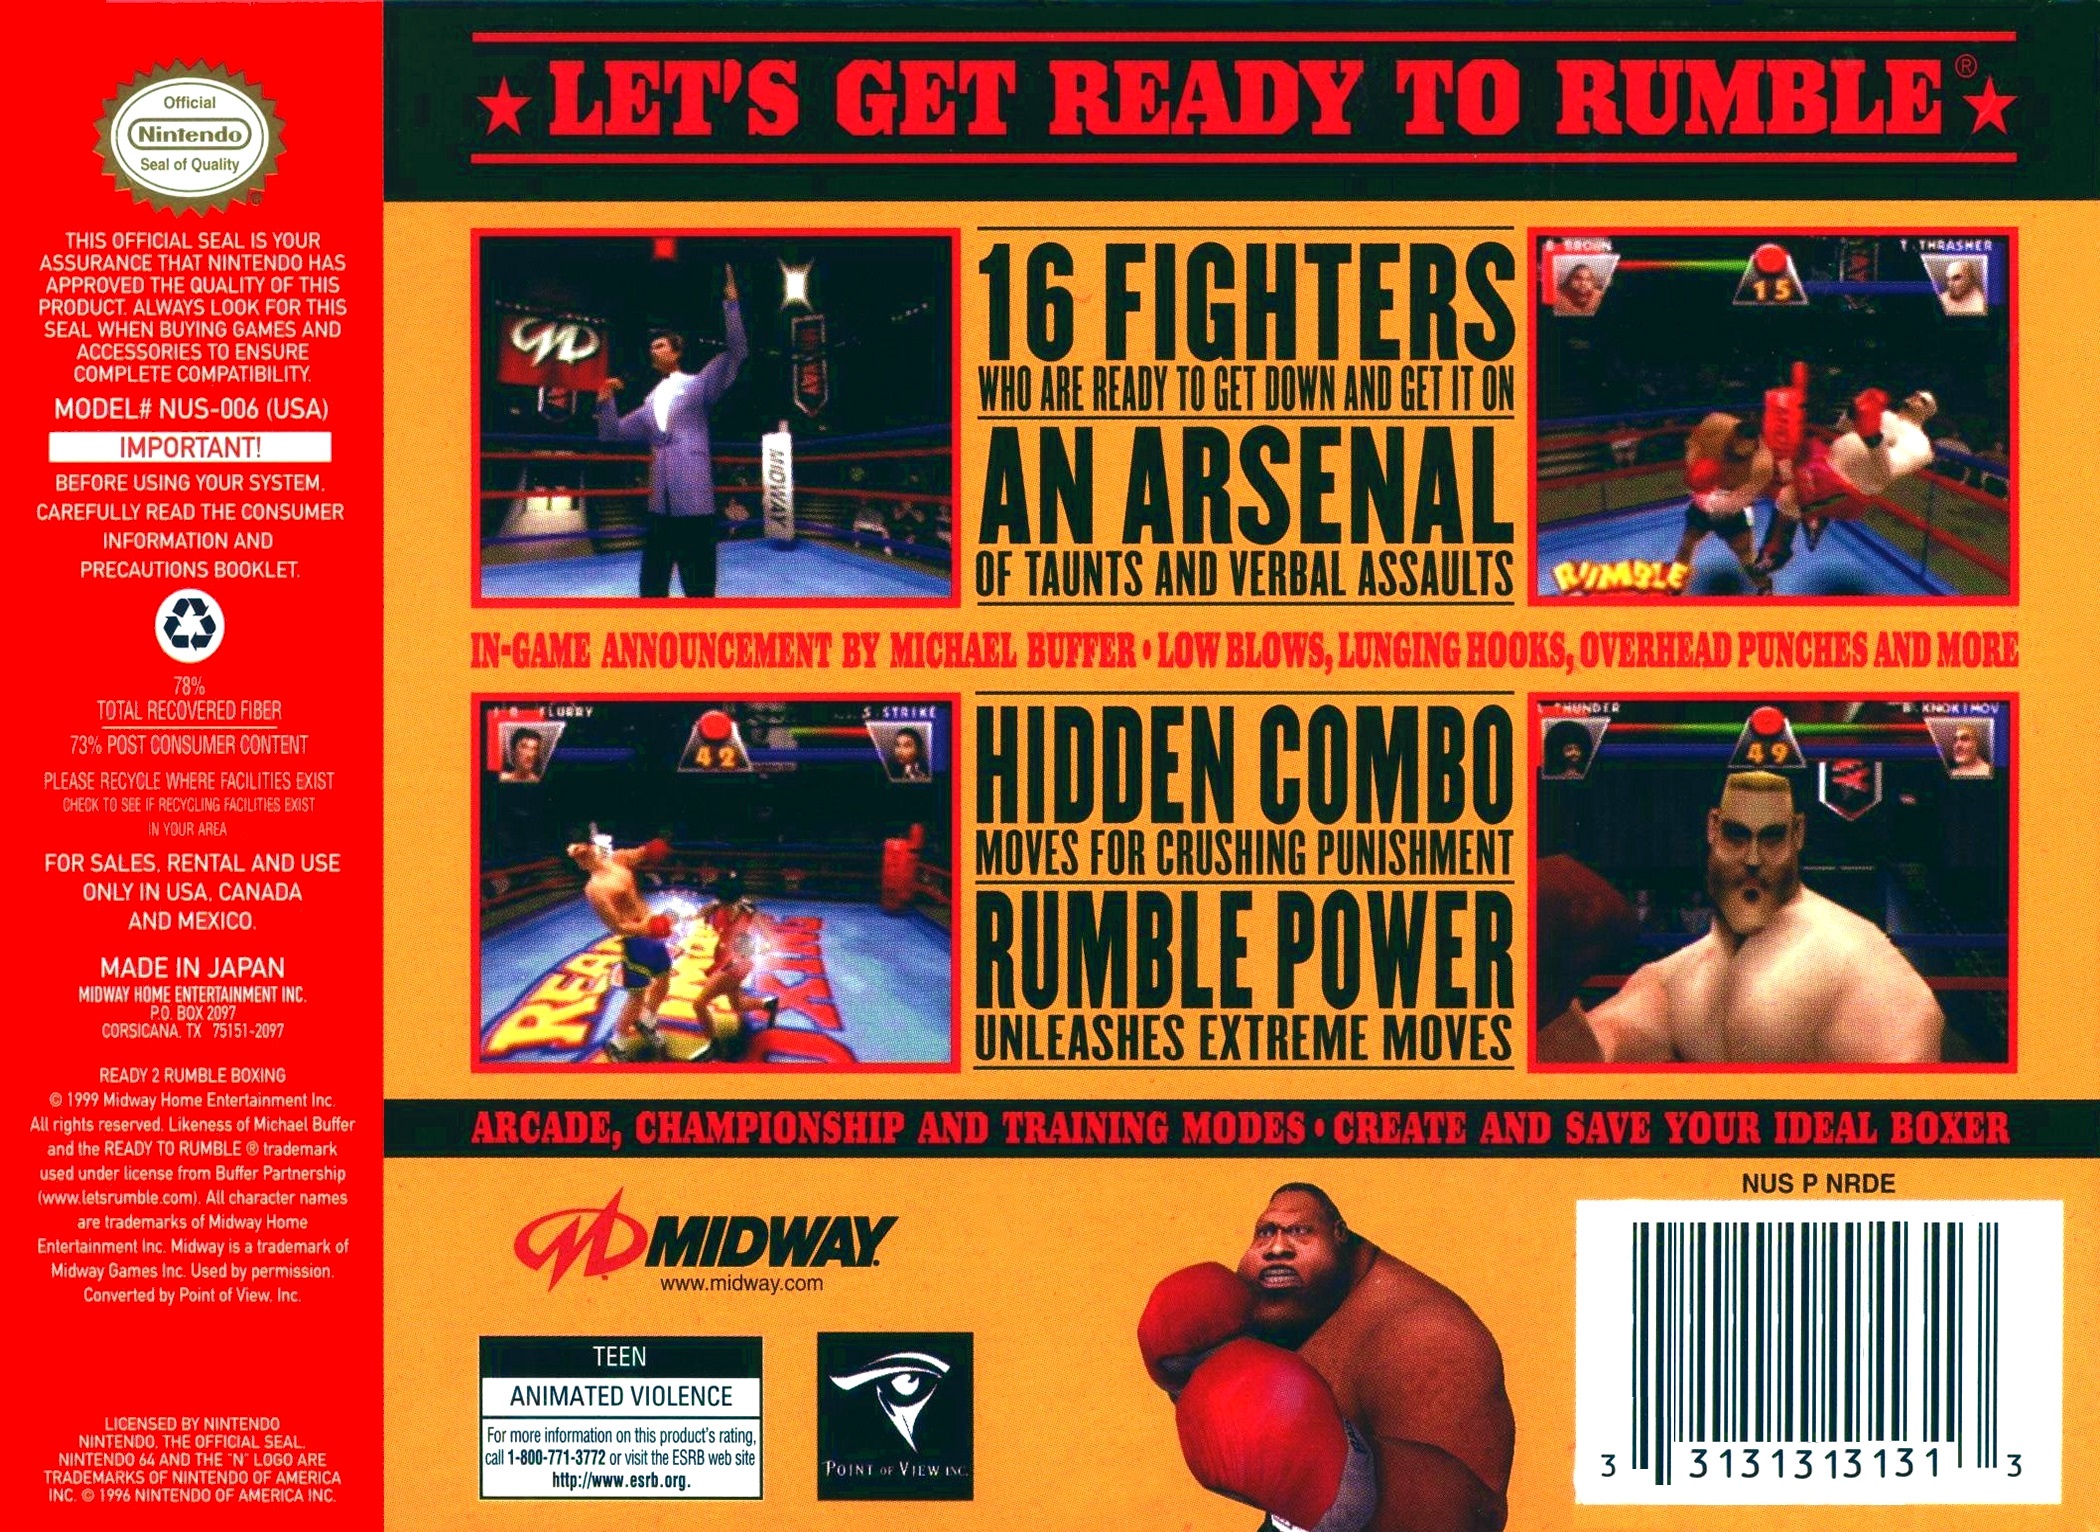 Ready 2 Rumble Boxing. Ready 2 Rumble Boxing: Round 2 ps2. Ready 2 Rumble Boxing 1 ps1. Unlock all Boxers ready 2 Rumble Boxing. Ready 2 use